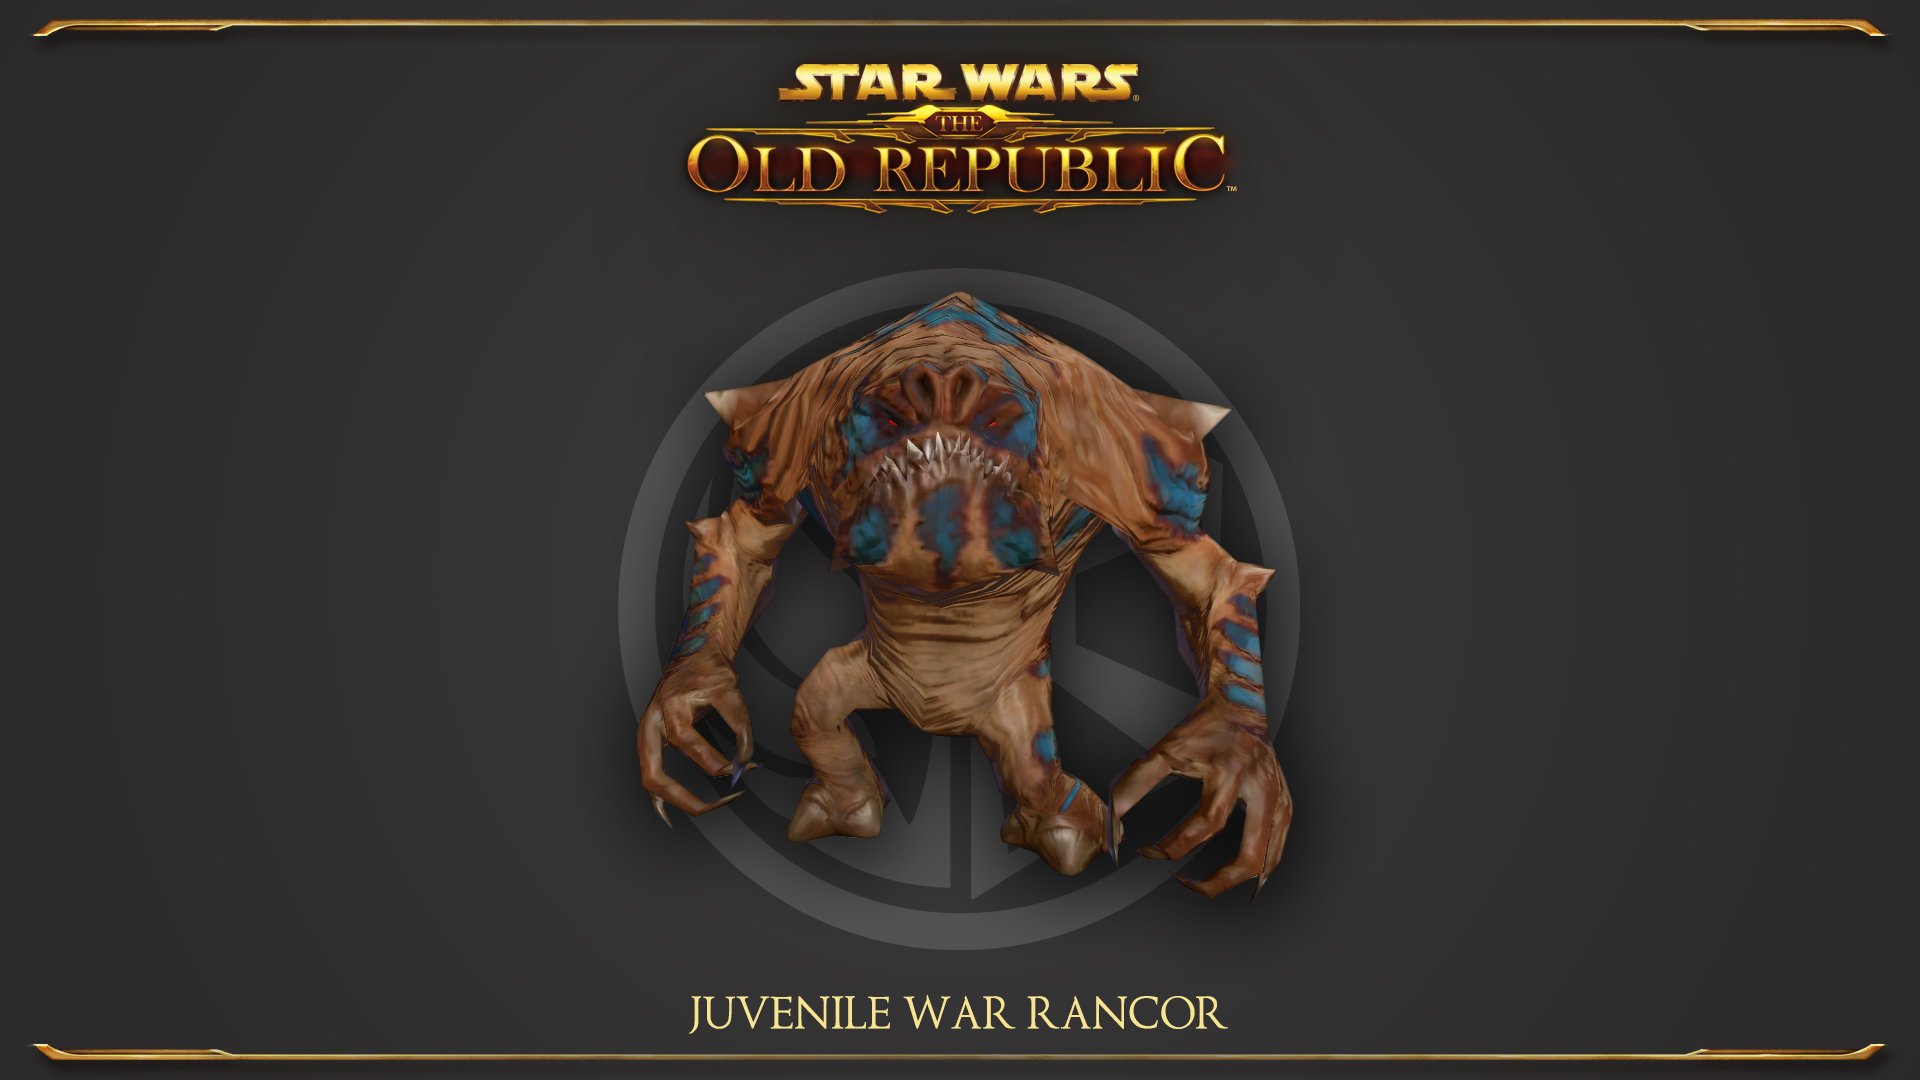 Star Wars: The Old Republic - 2400 Cartel Coins [Online Game Code]